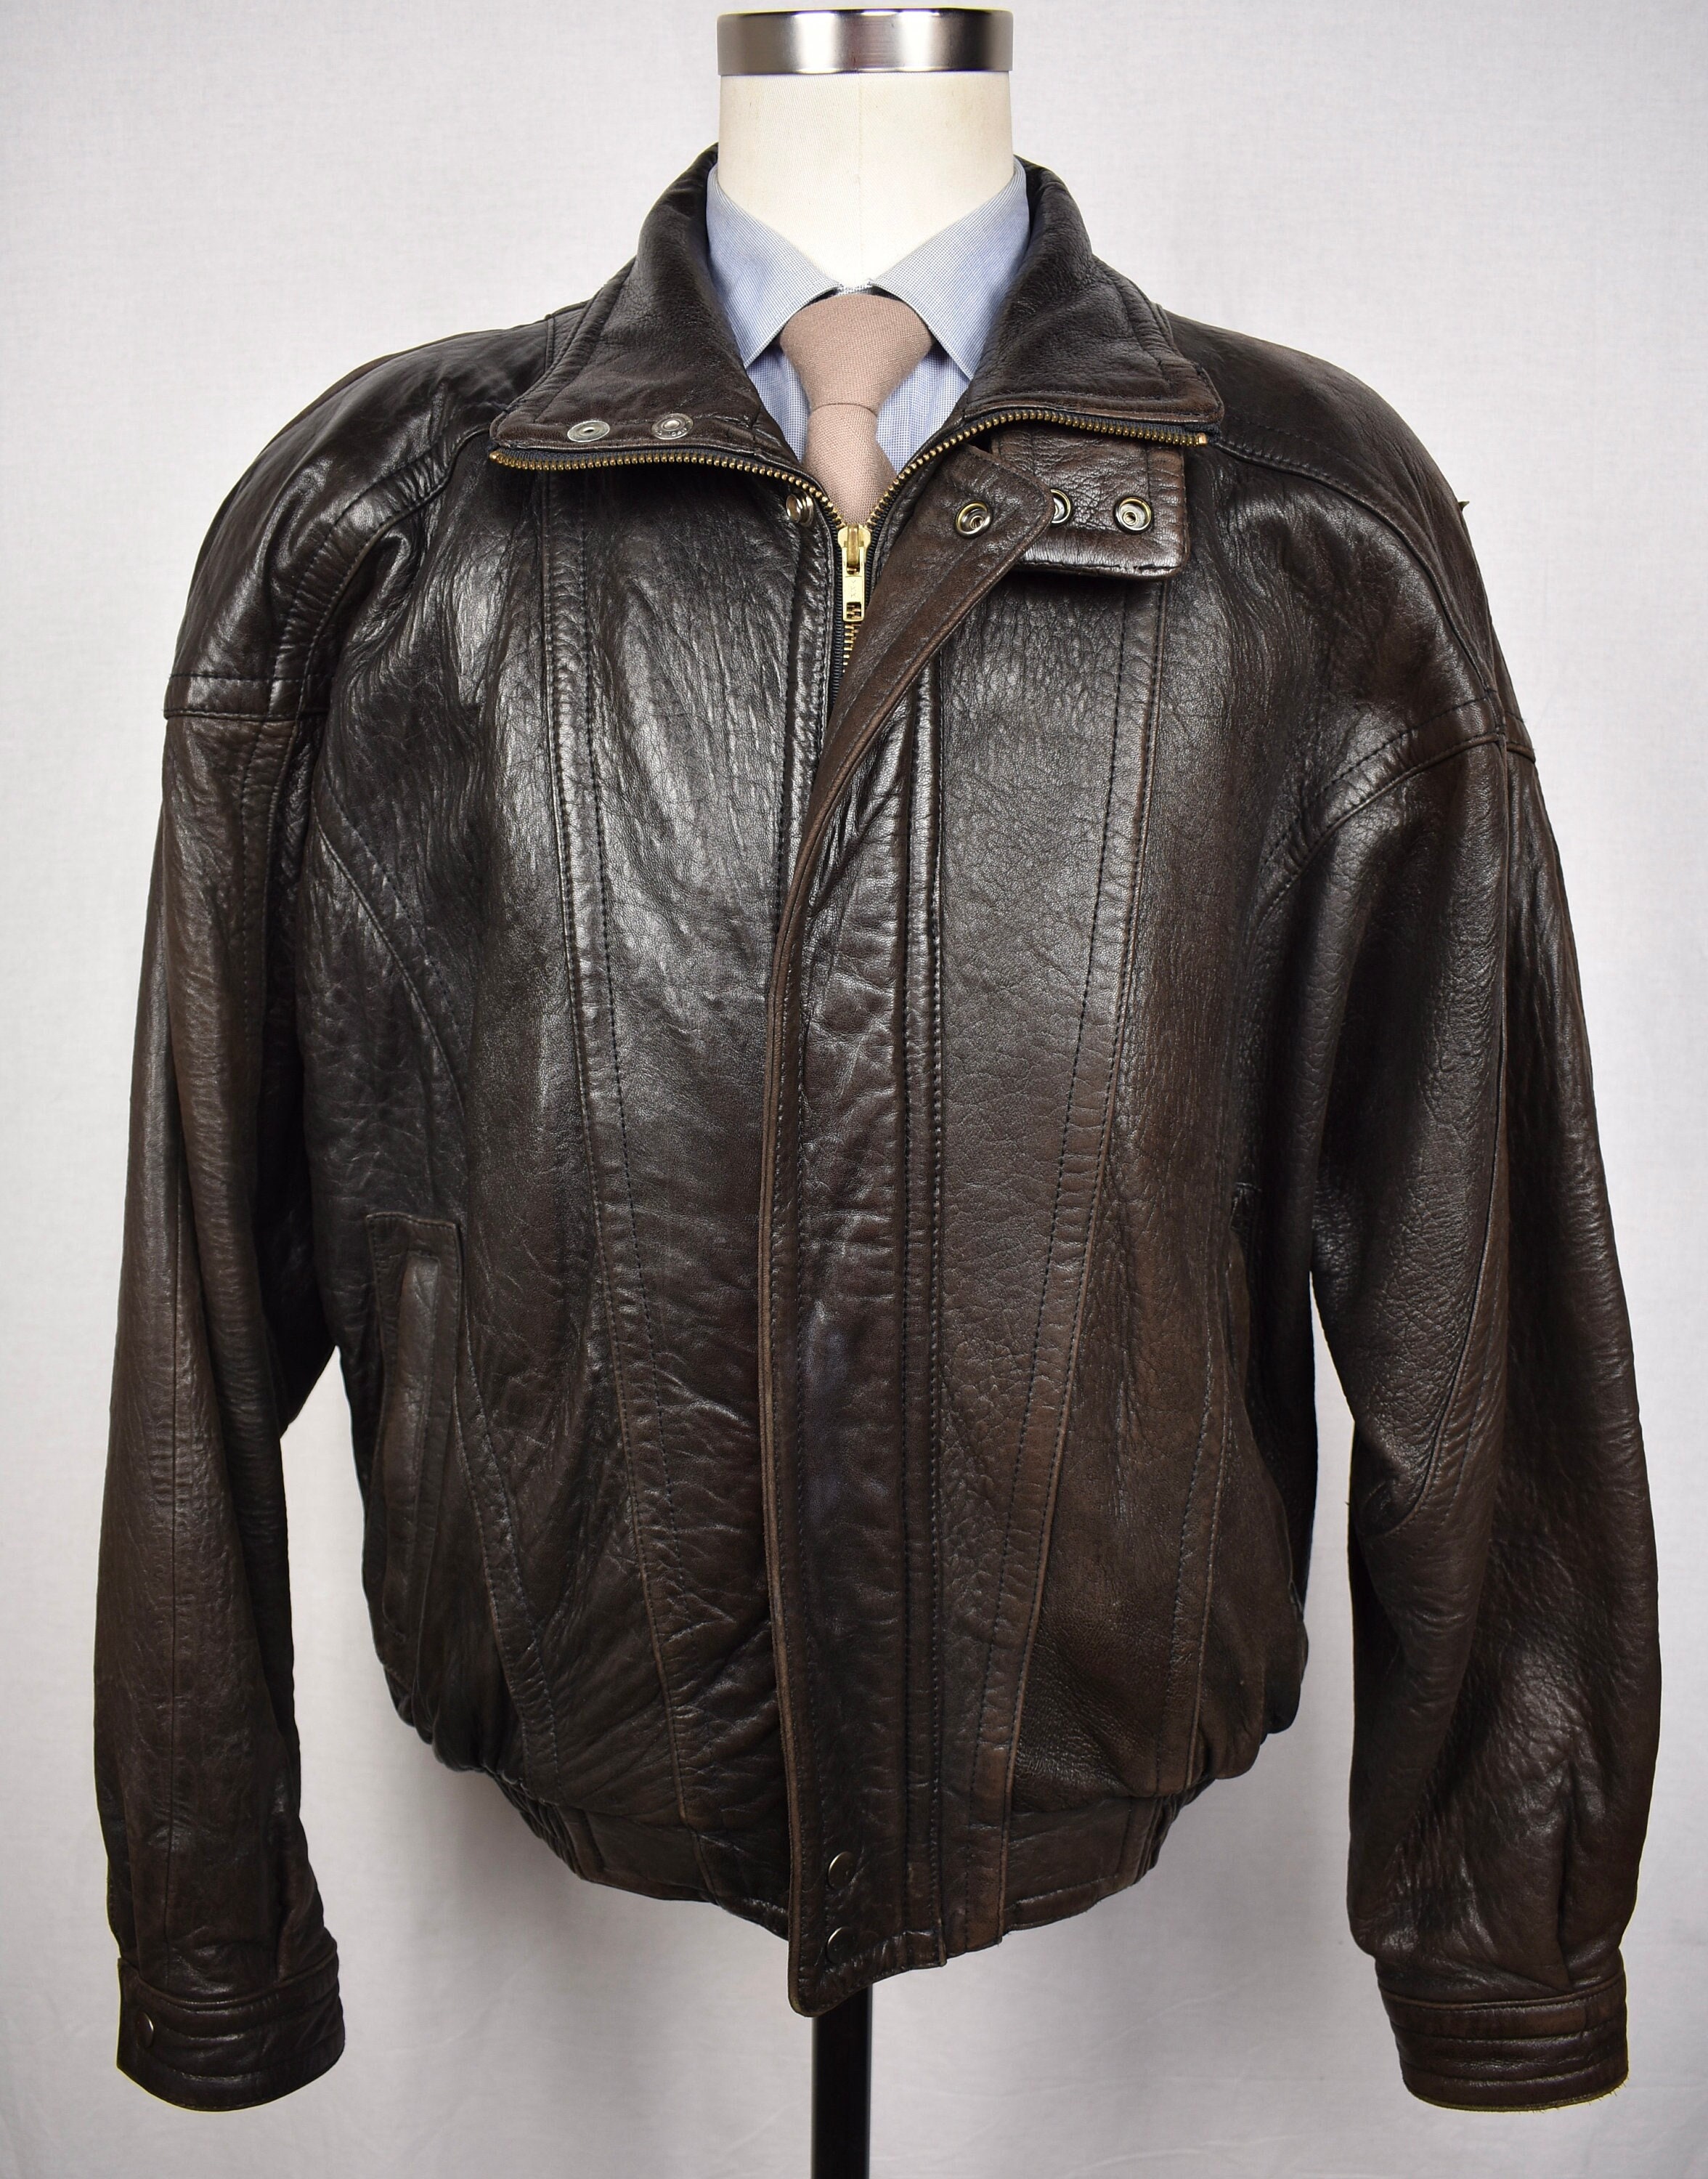 Midway Leather Solid Brown 100% Leather Full Zip Flight/bomber